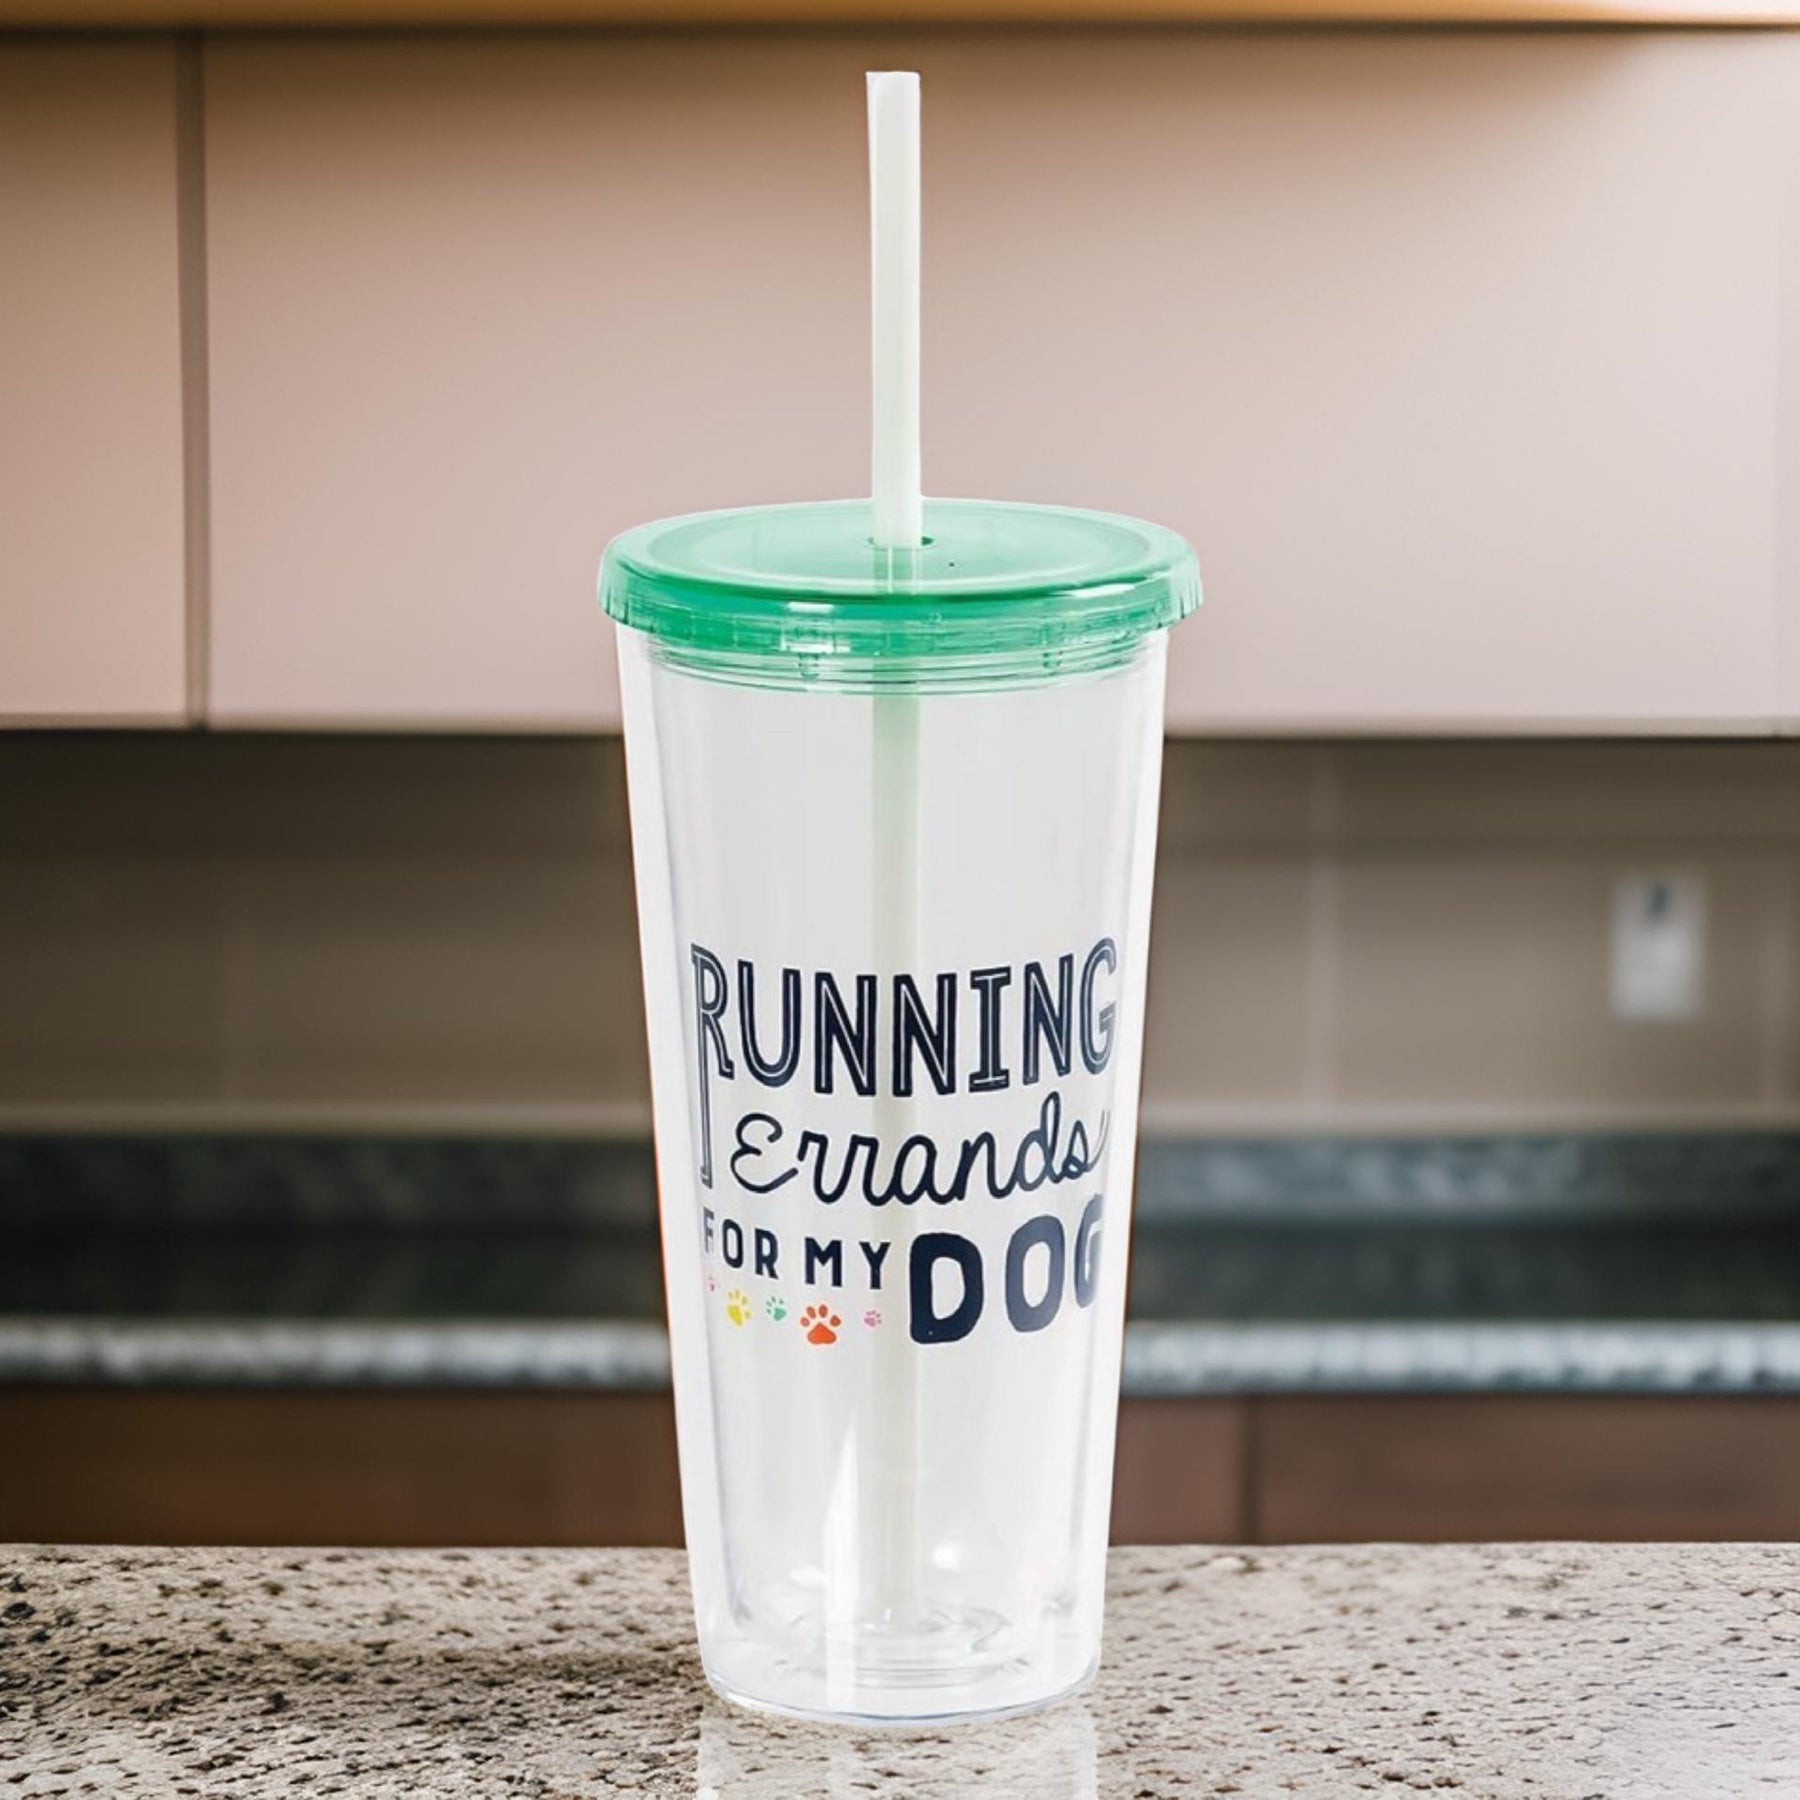 20oz "Running Errands For My Dog" Acrylic Tumbler by CR Gibson - Double Wall